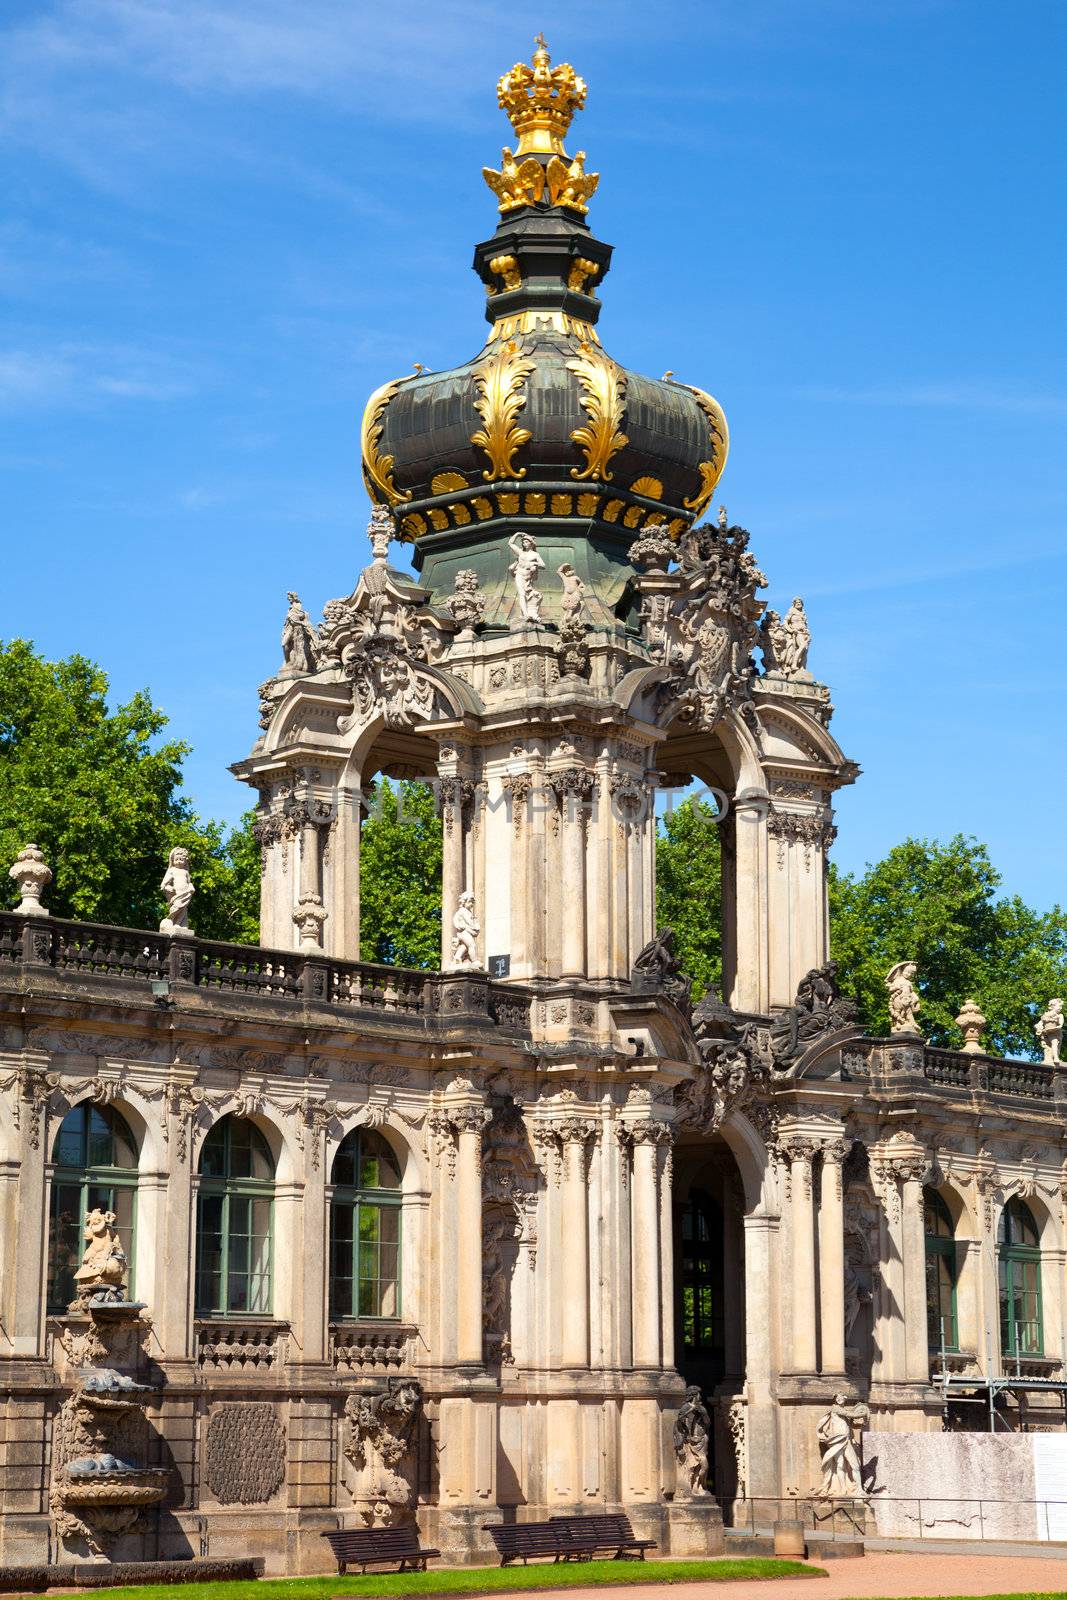 The Zwinger palace of Dresden. eastern Germany, built in Rococo  by motorolka